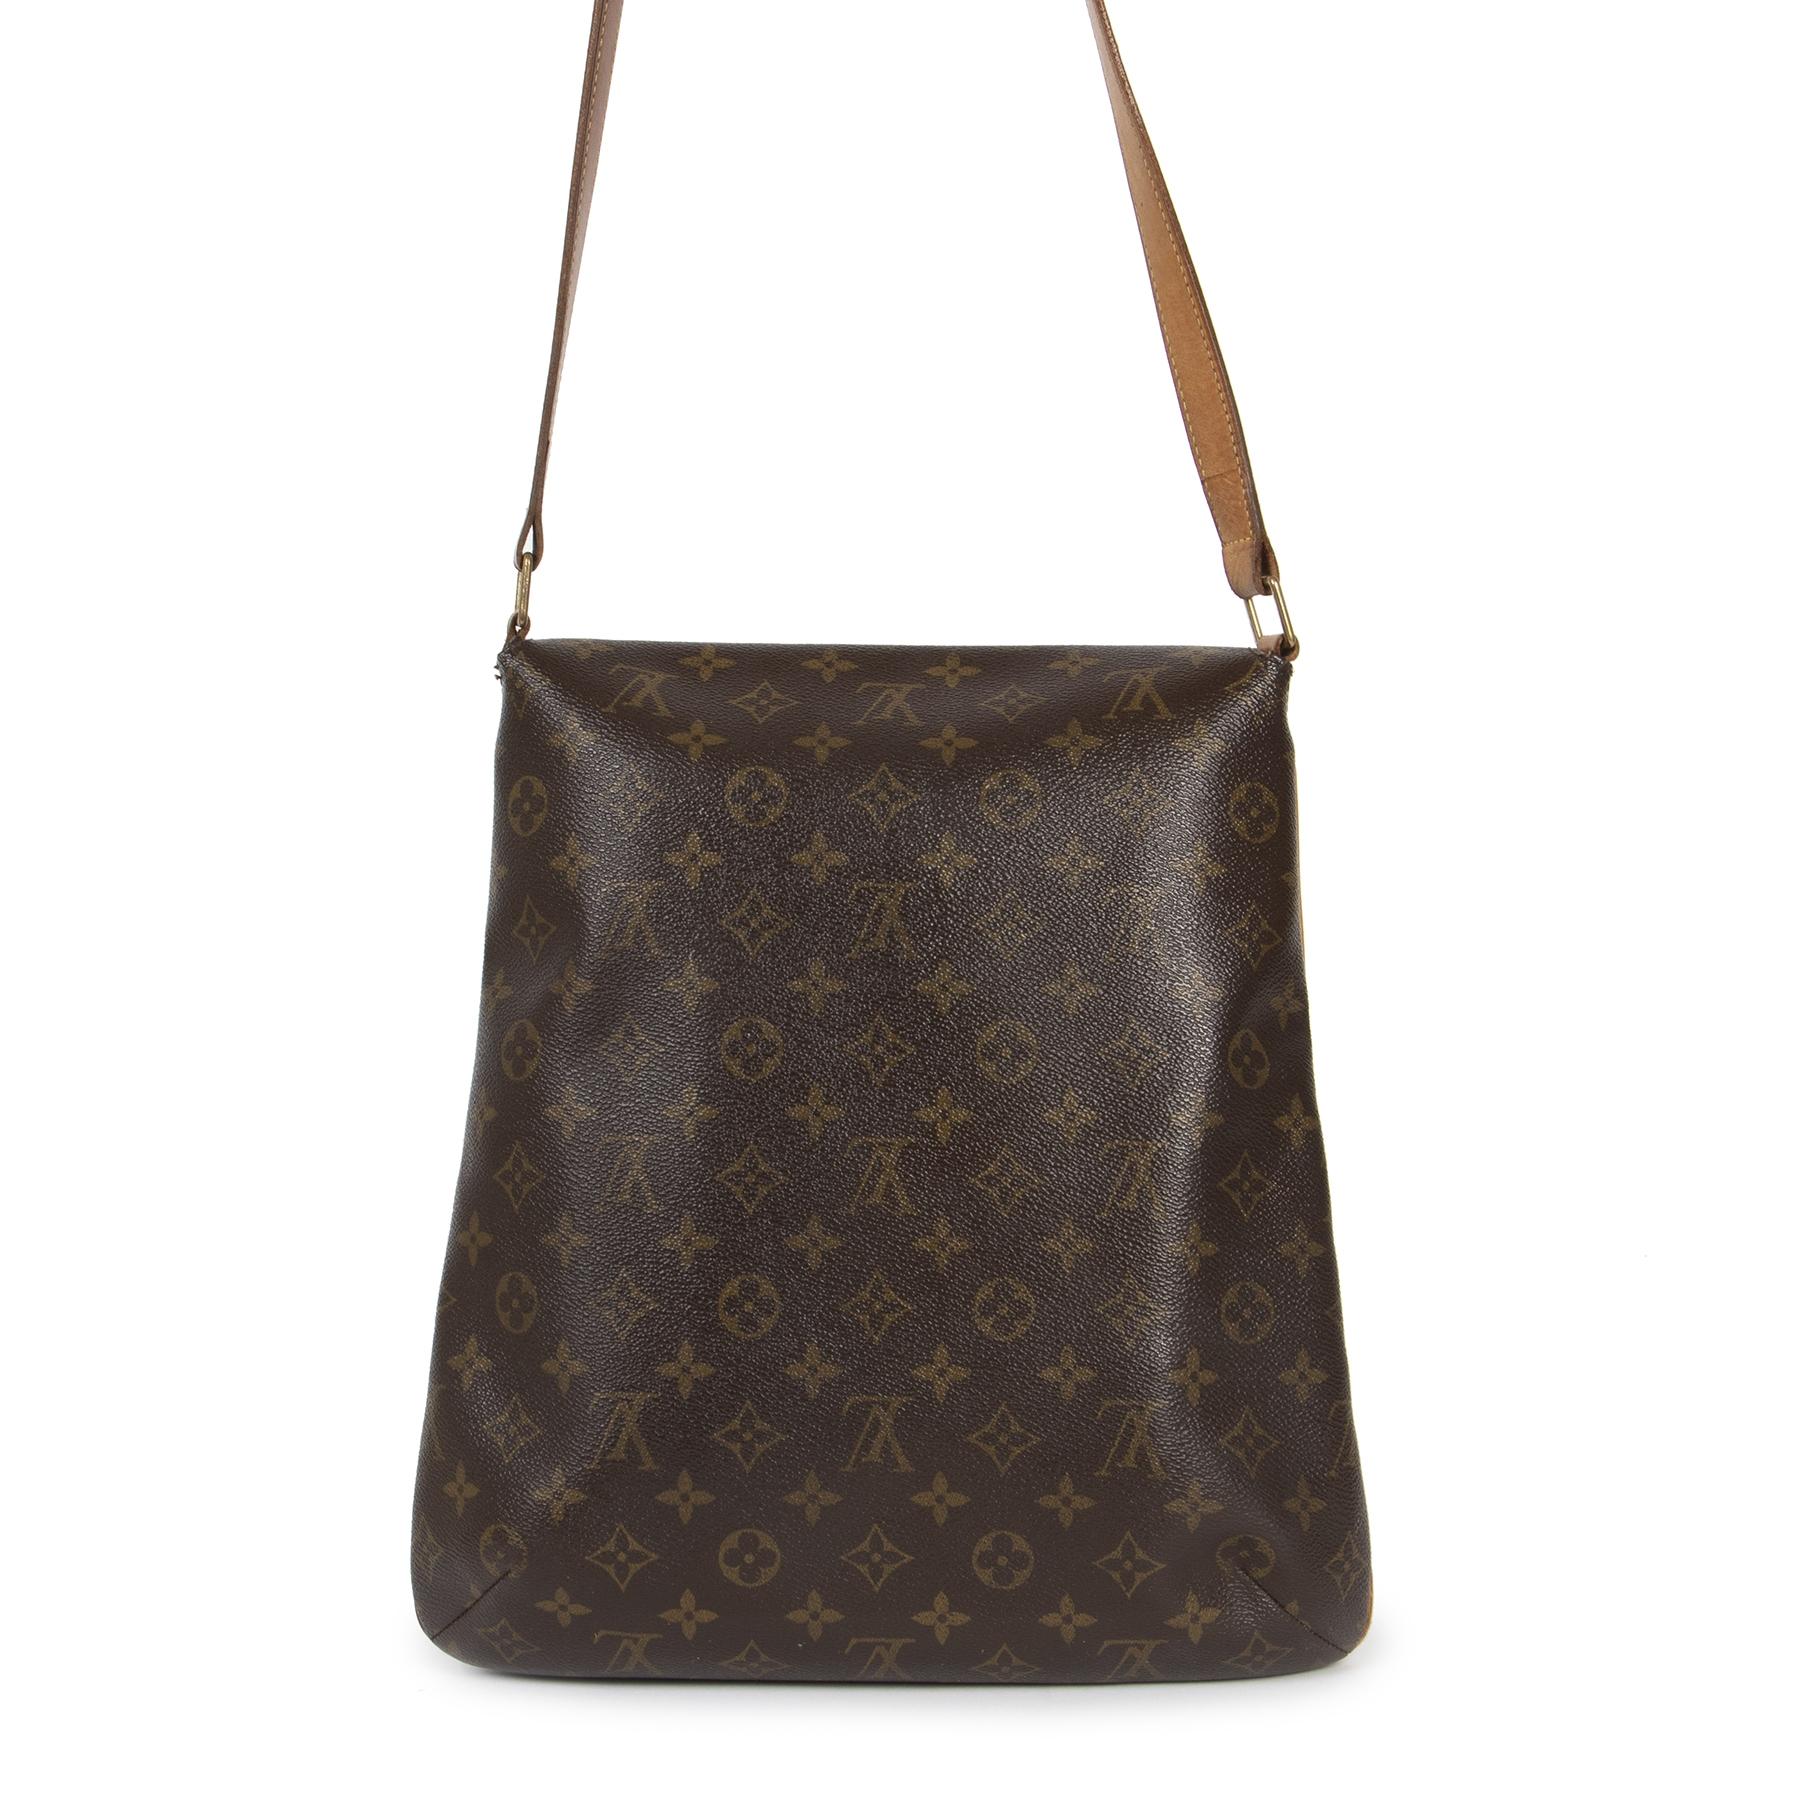 good preloved condition

Louis Vuitton Monogram Musette Bag

This amazing yet practical Musette bag by Louis Vuitton is the perfect fit for your everyday essentials. It comes in the brands signature canvas coated monogram pattern leather. Adjust the